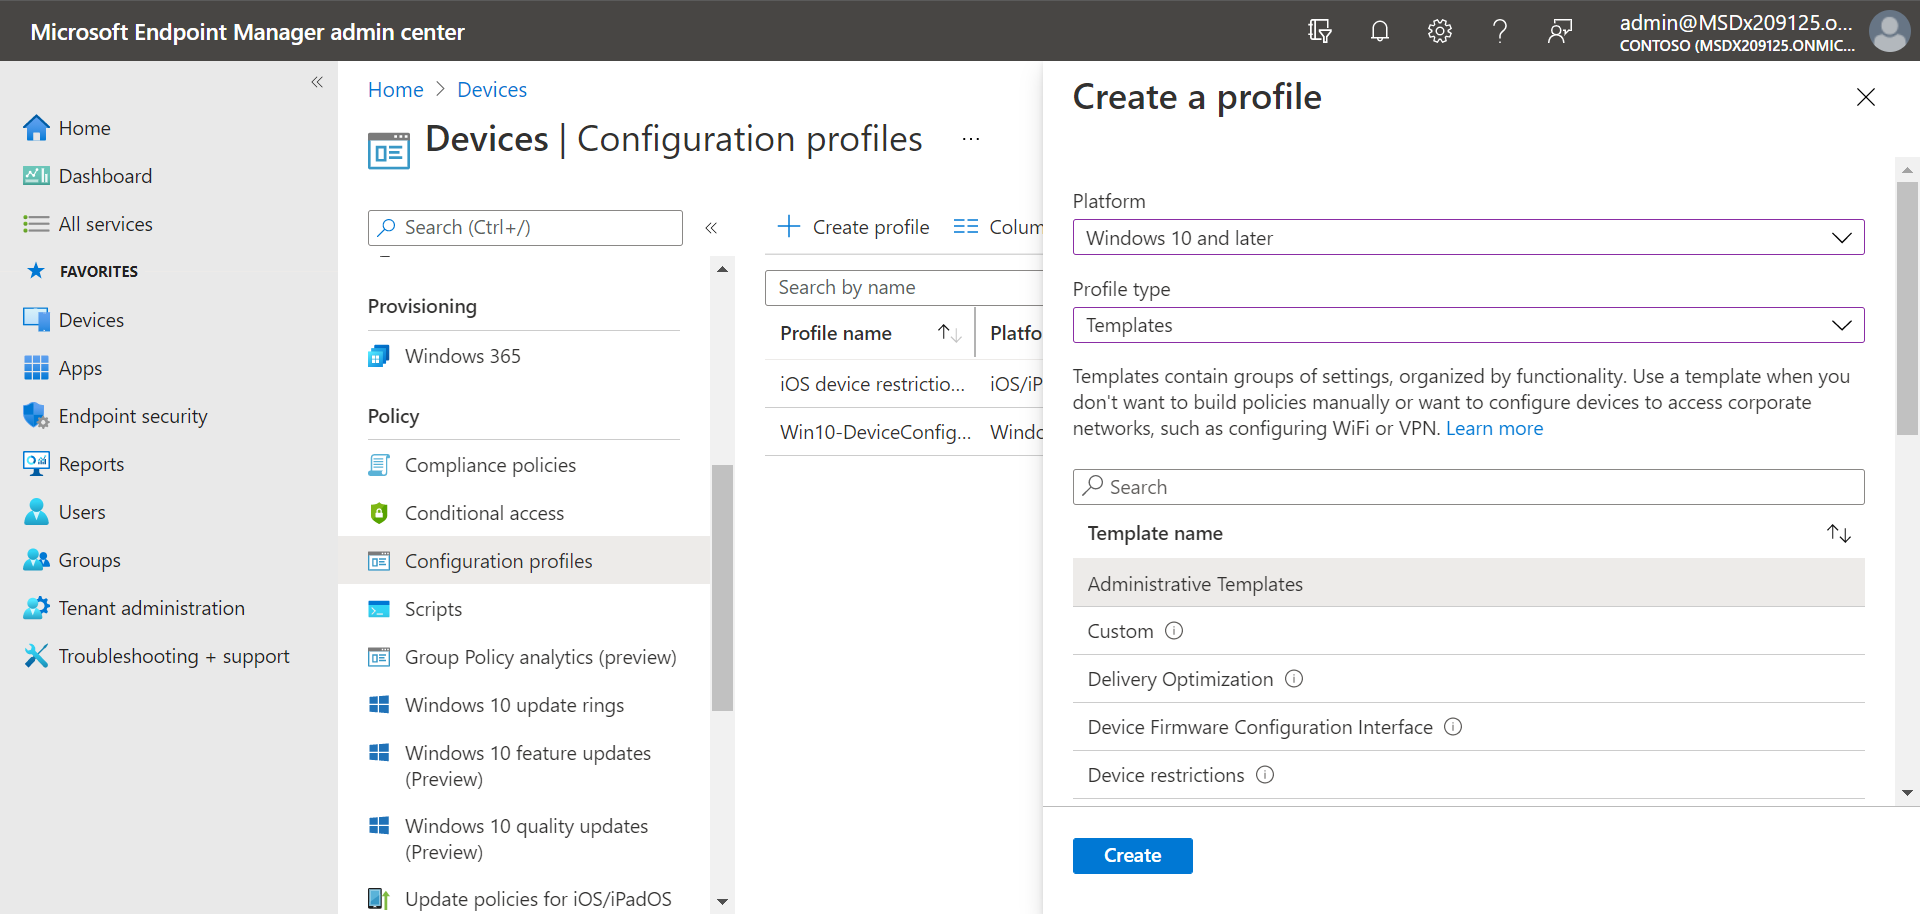 Microsoft Endpoint Manager administrative templates